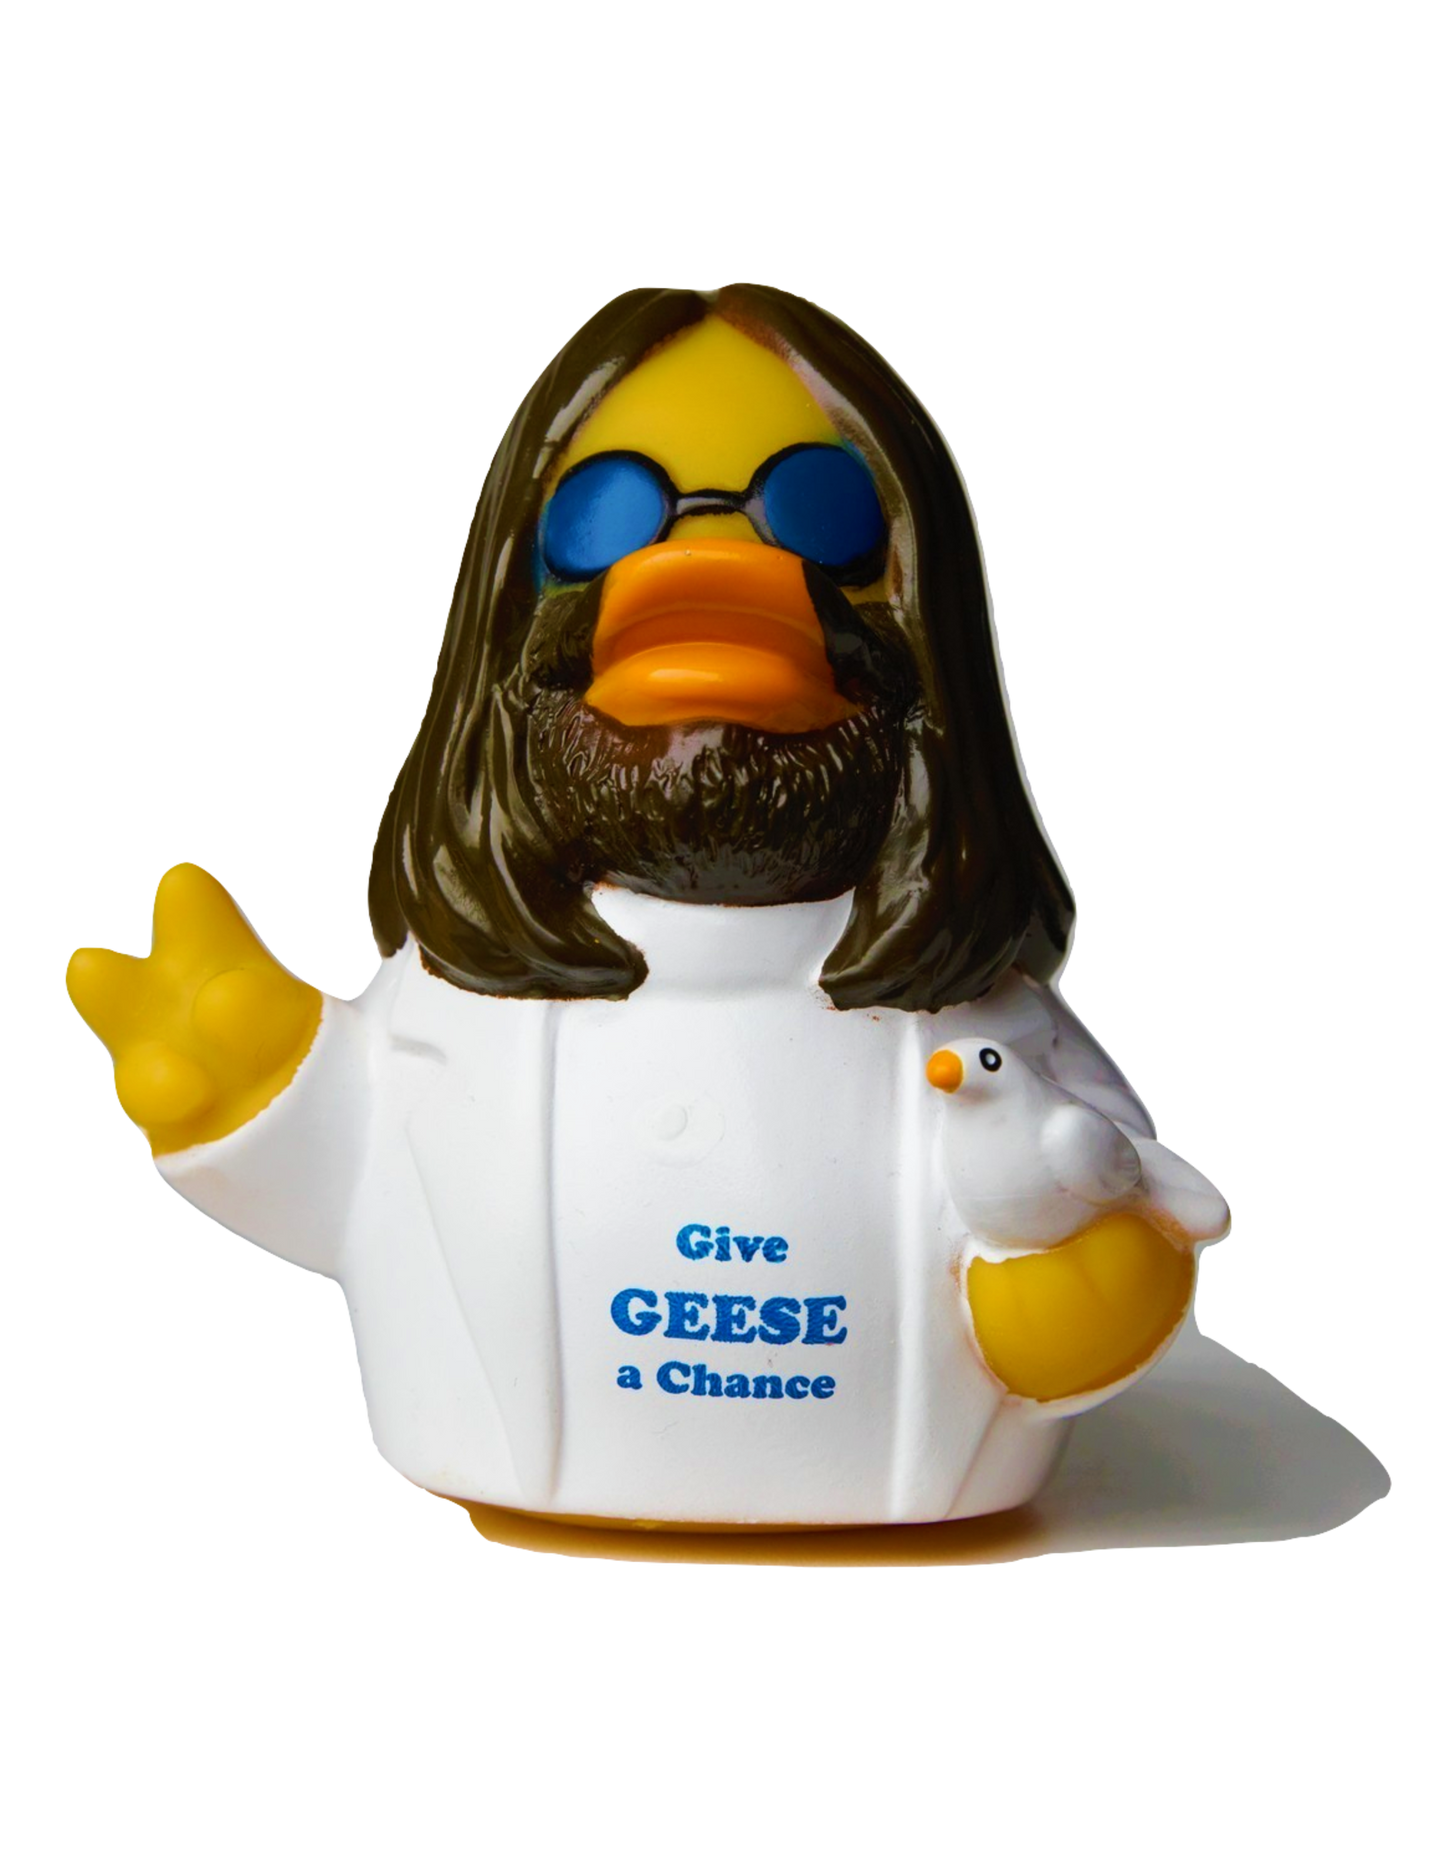 John Lennon "Give Geese a Chance" Rubber Duck